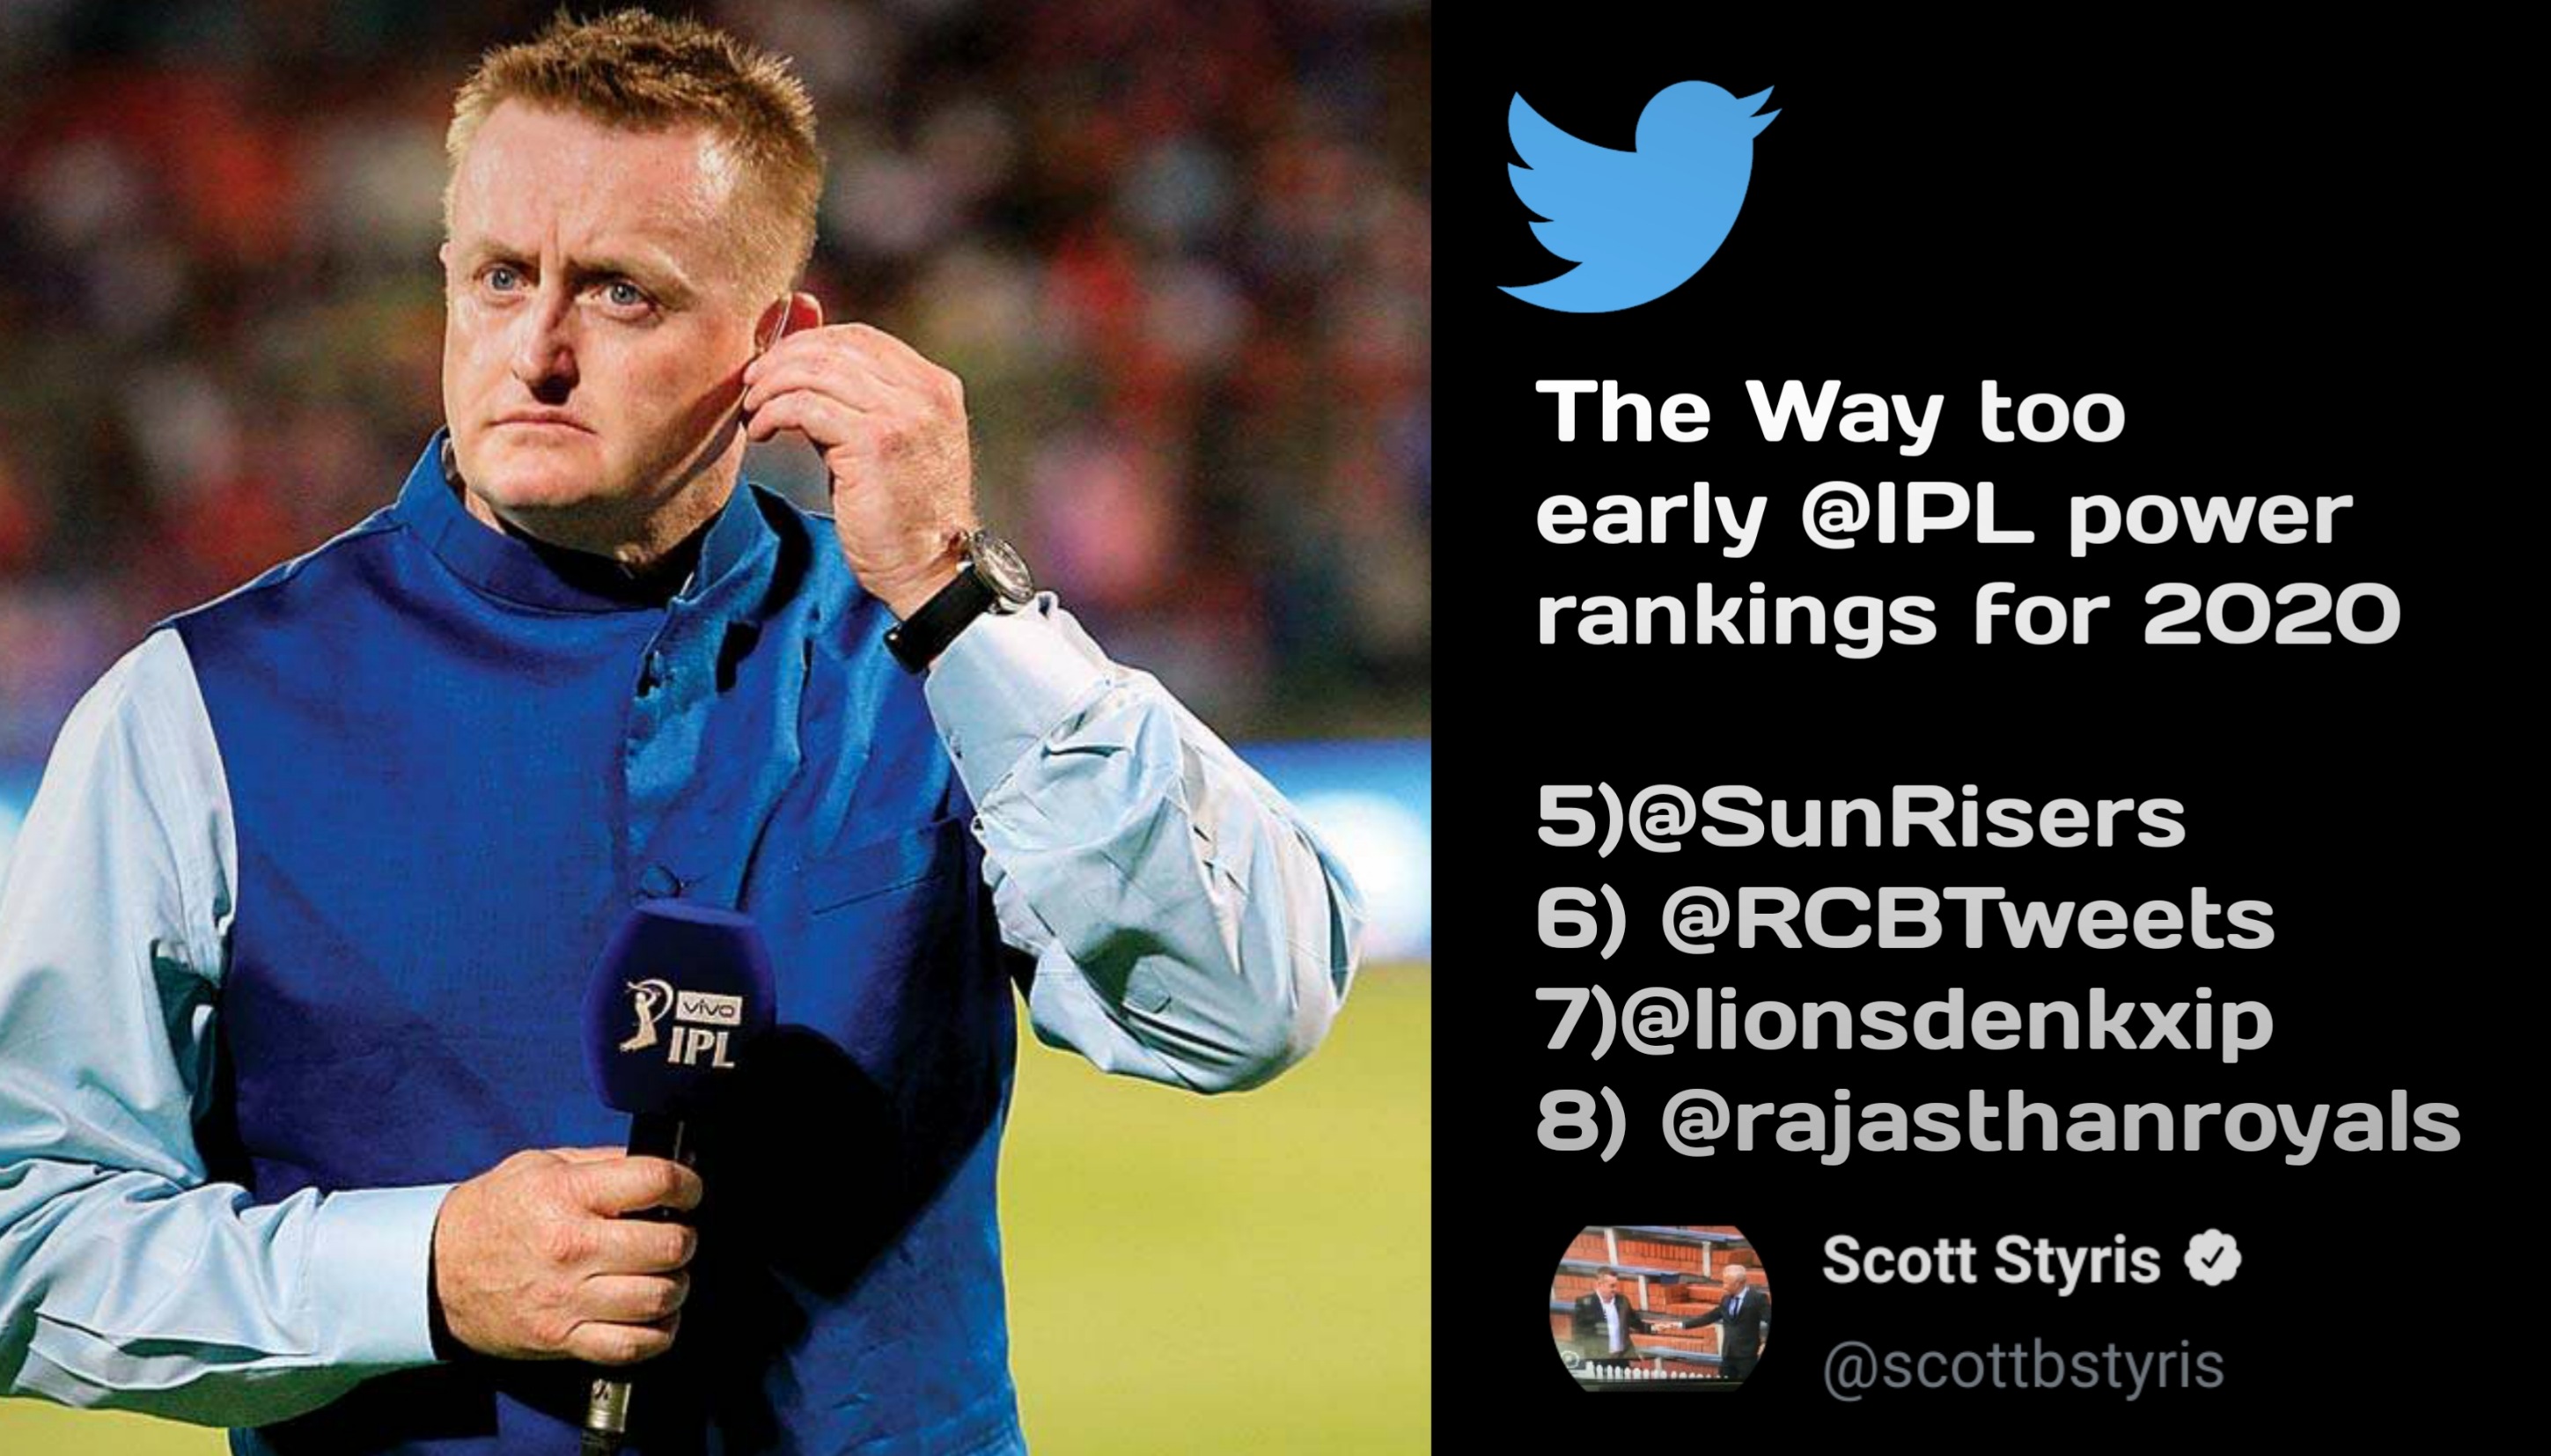 Scott Styris predicts RR to finish last in IPL 2020; see how Rajasthan responded